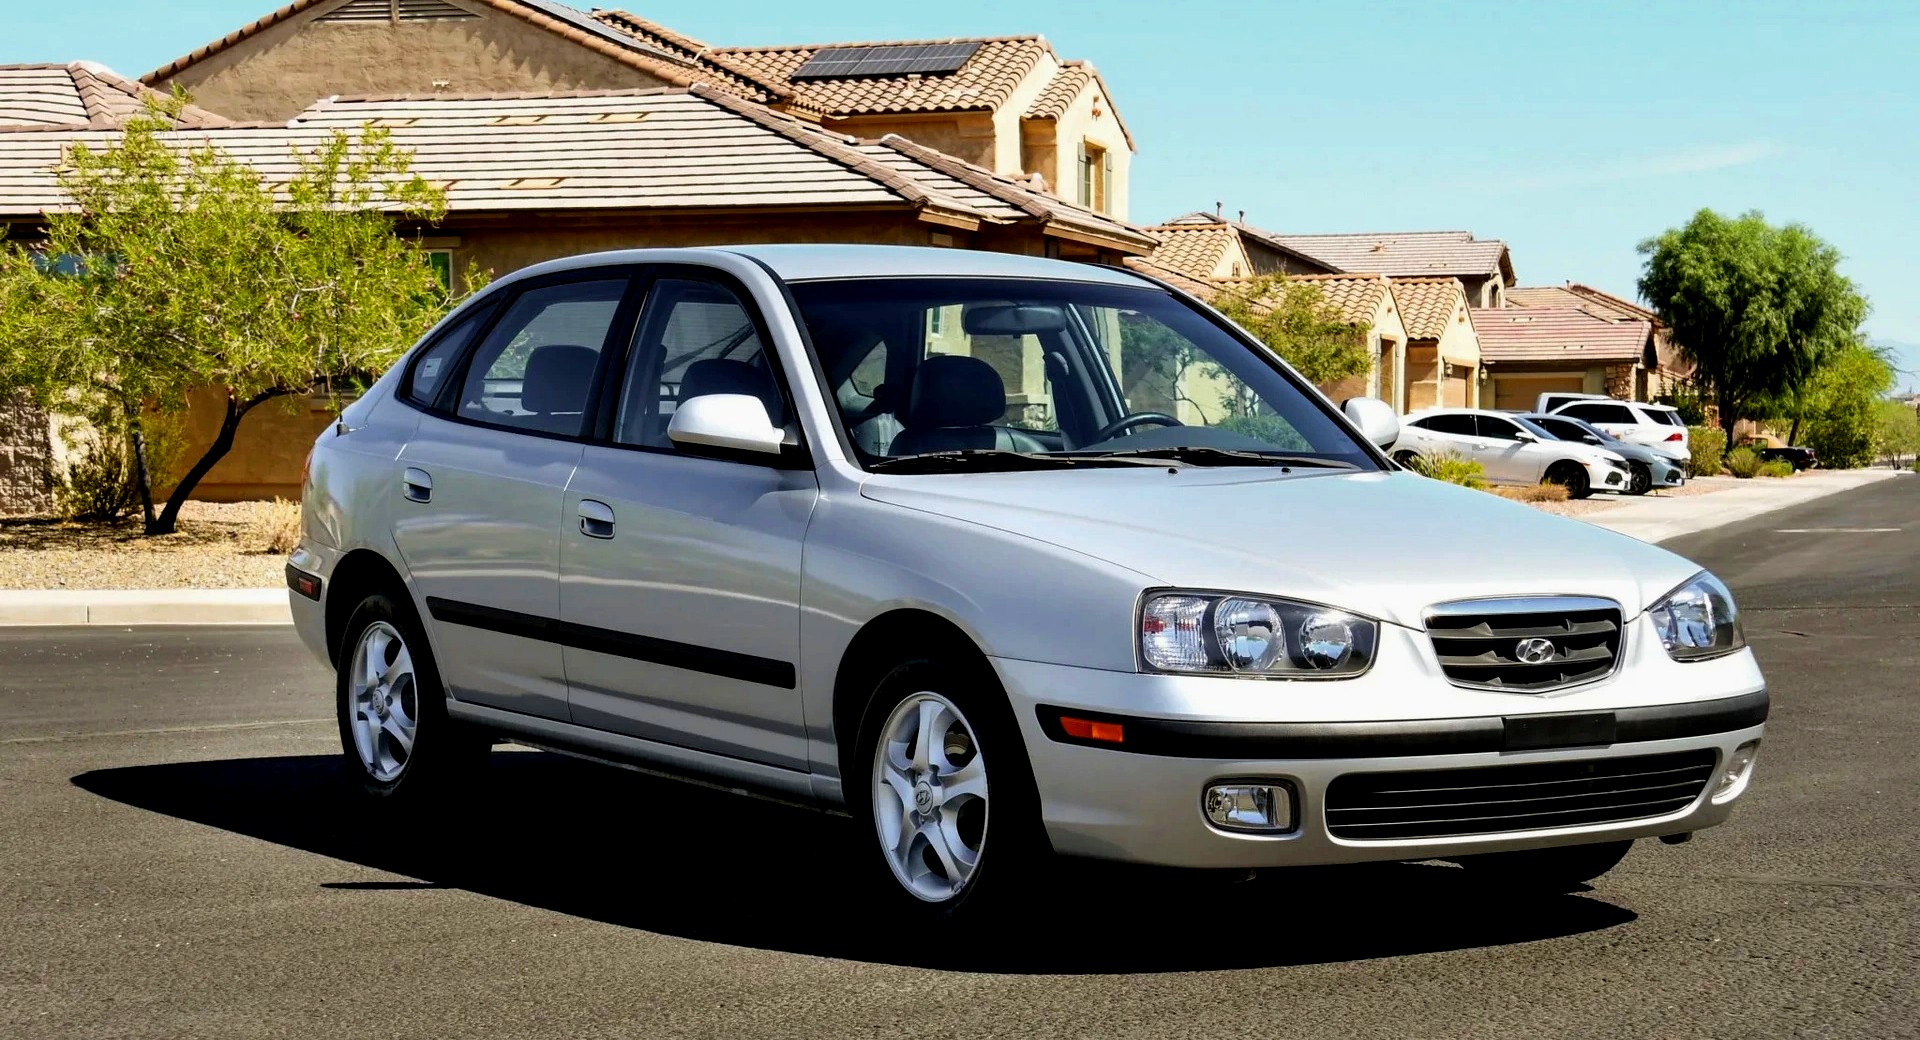 Someone Saved This 2003 Hyundai Elantra Like It Was A Priceless Classic  Automobile So You Can Buy It | Carscoops